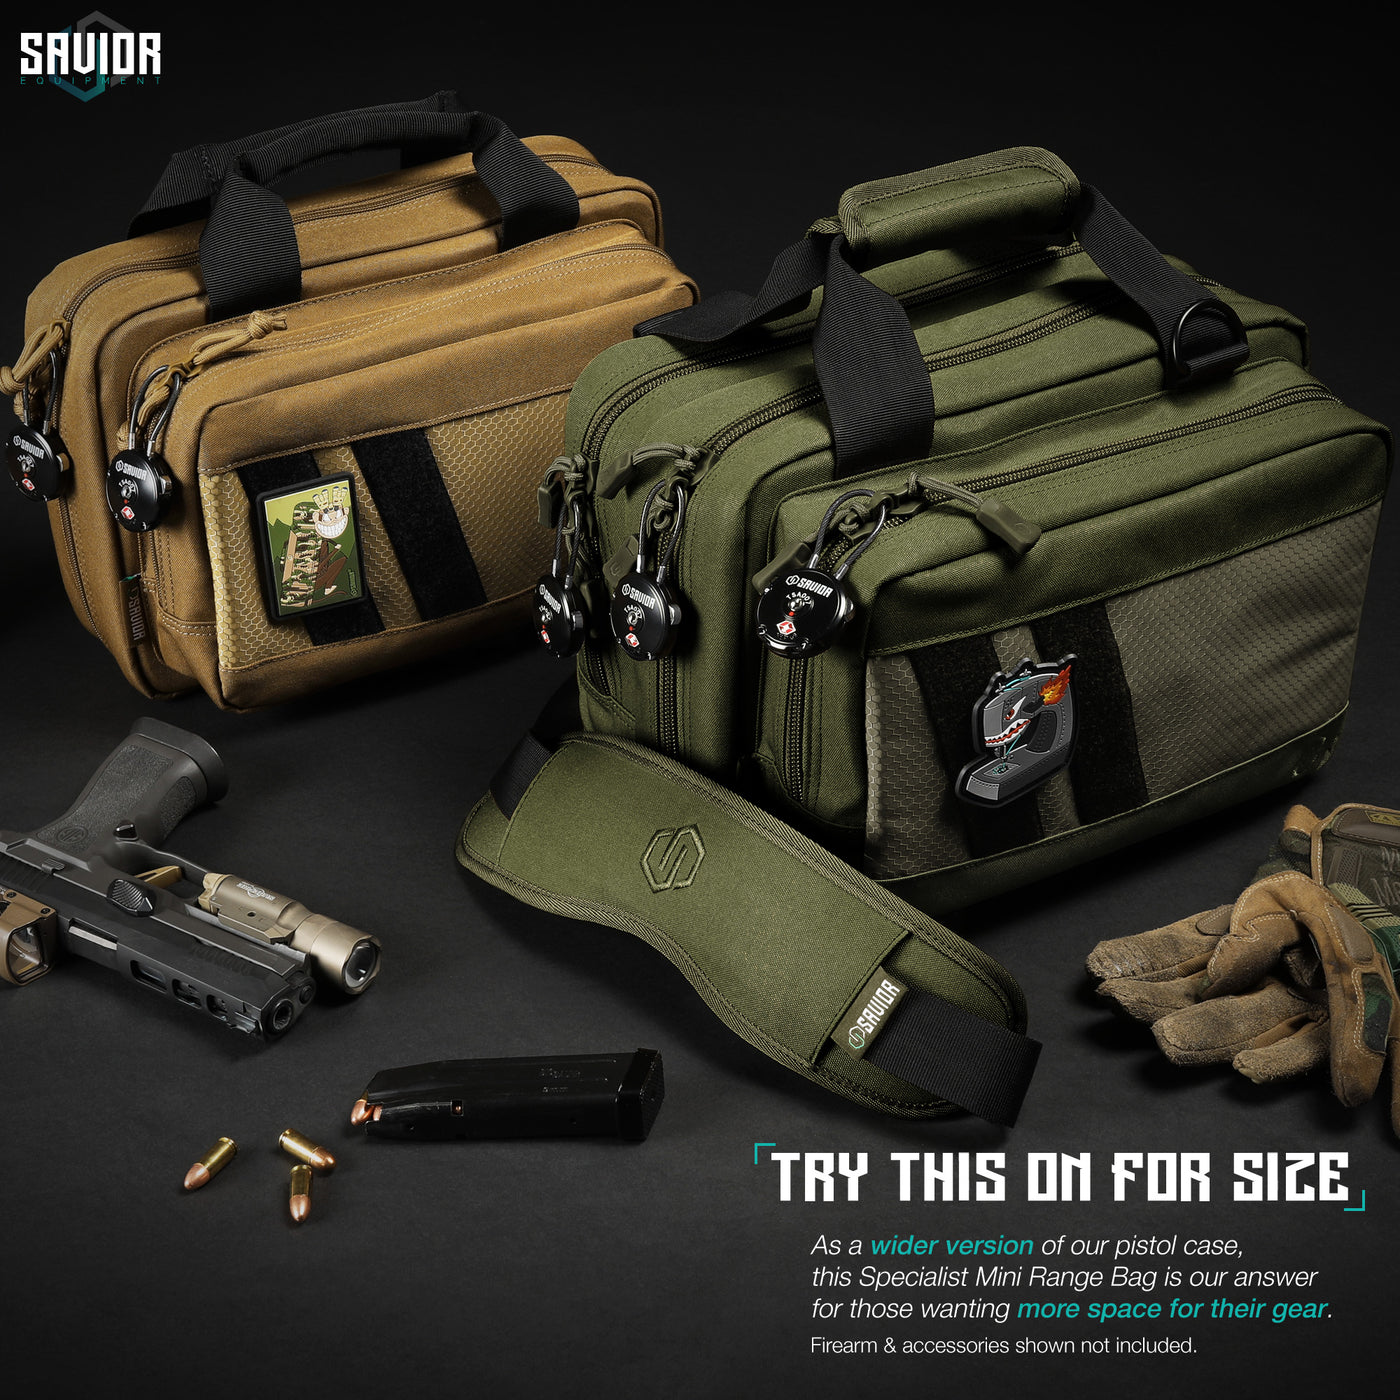 Try This On For Size - As a wider version of our Pistol Case, this Specialist Mini Range Bag is our answer for those wanting more space for their gear. Firearms & accessories shown not included.